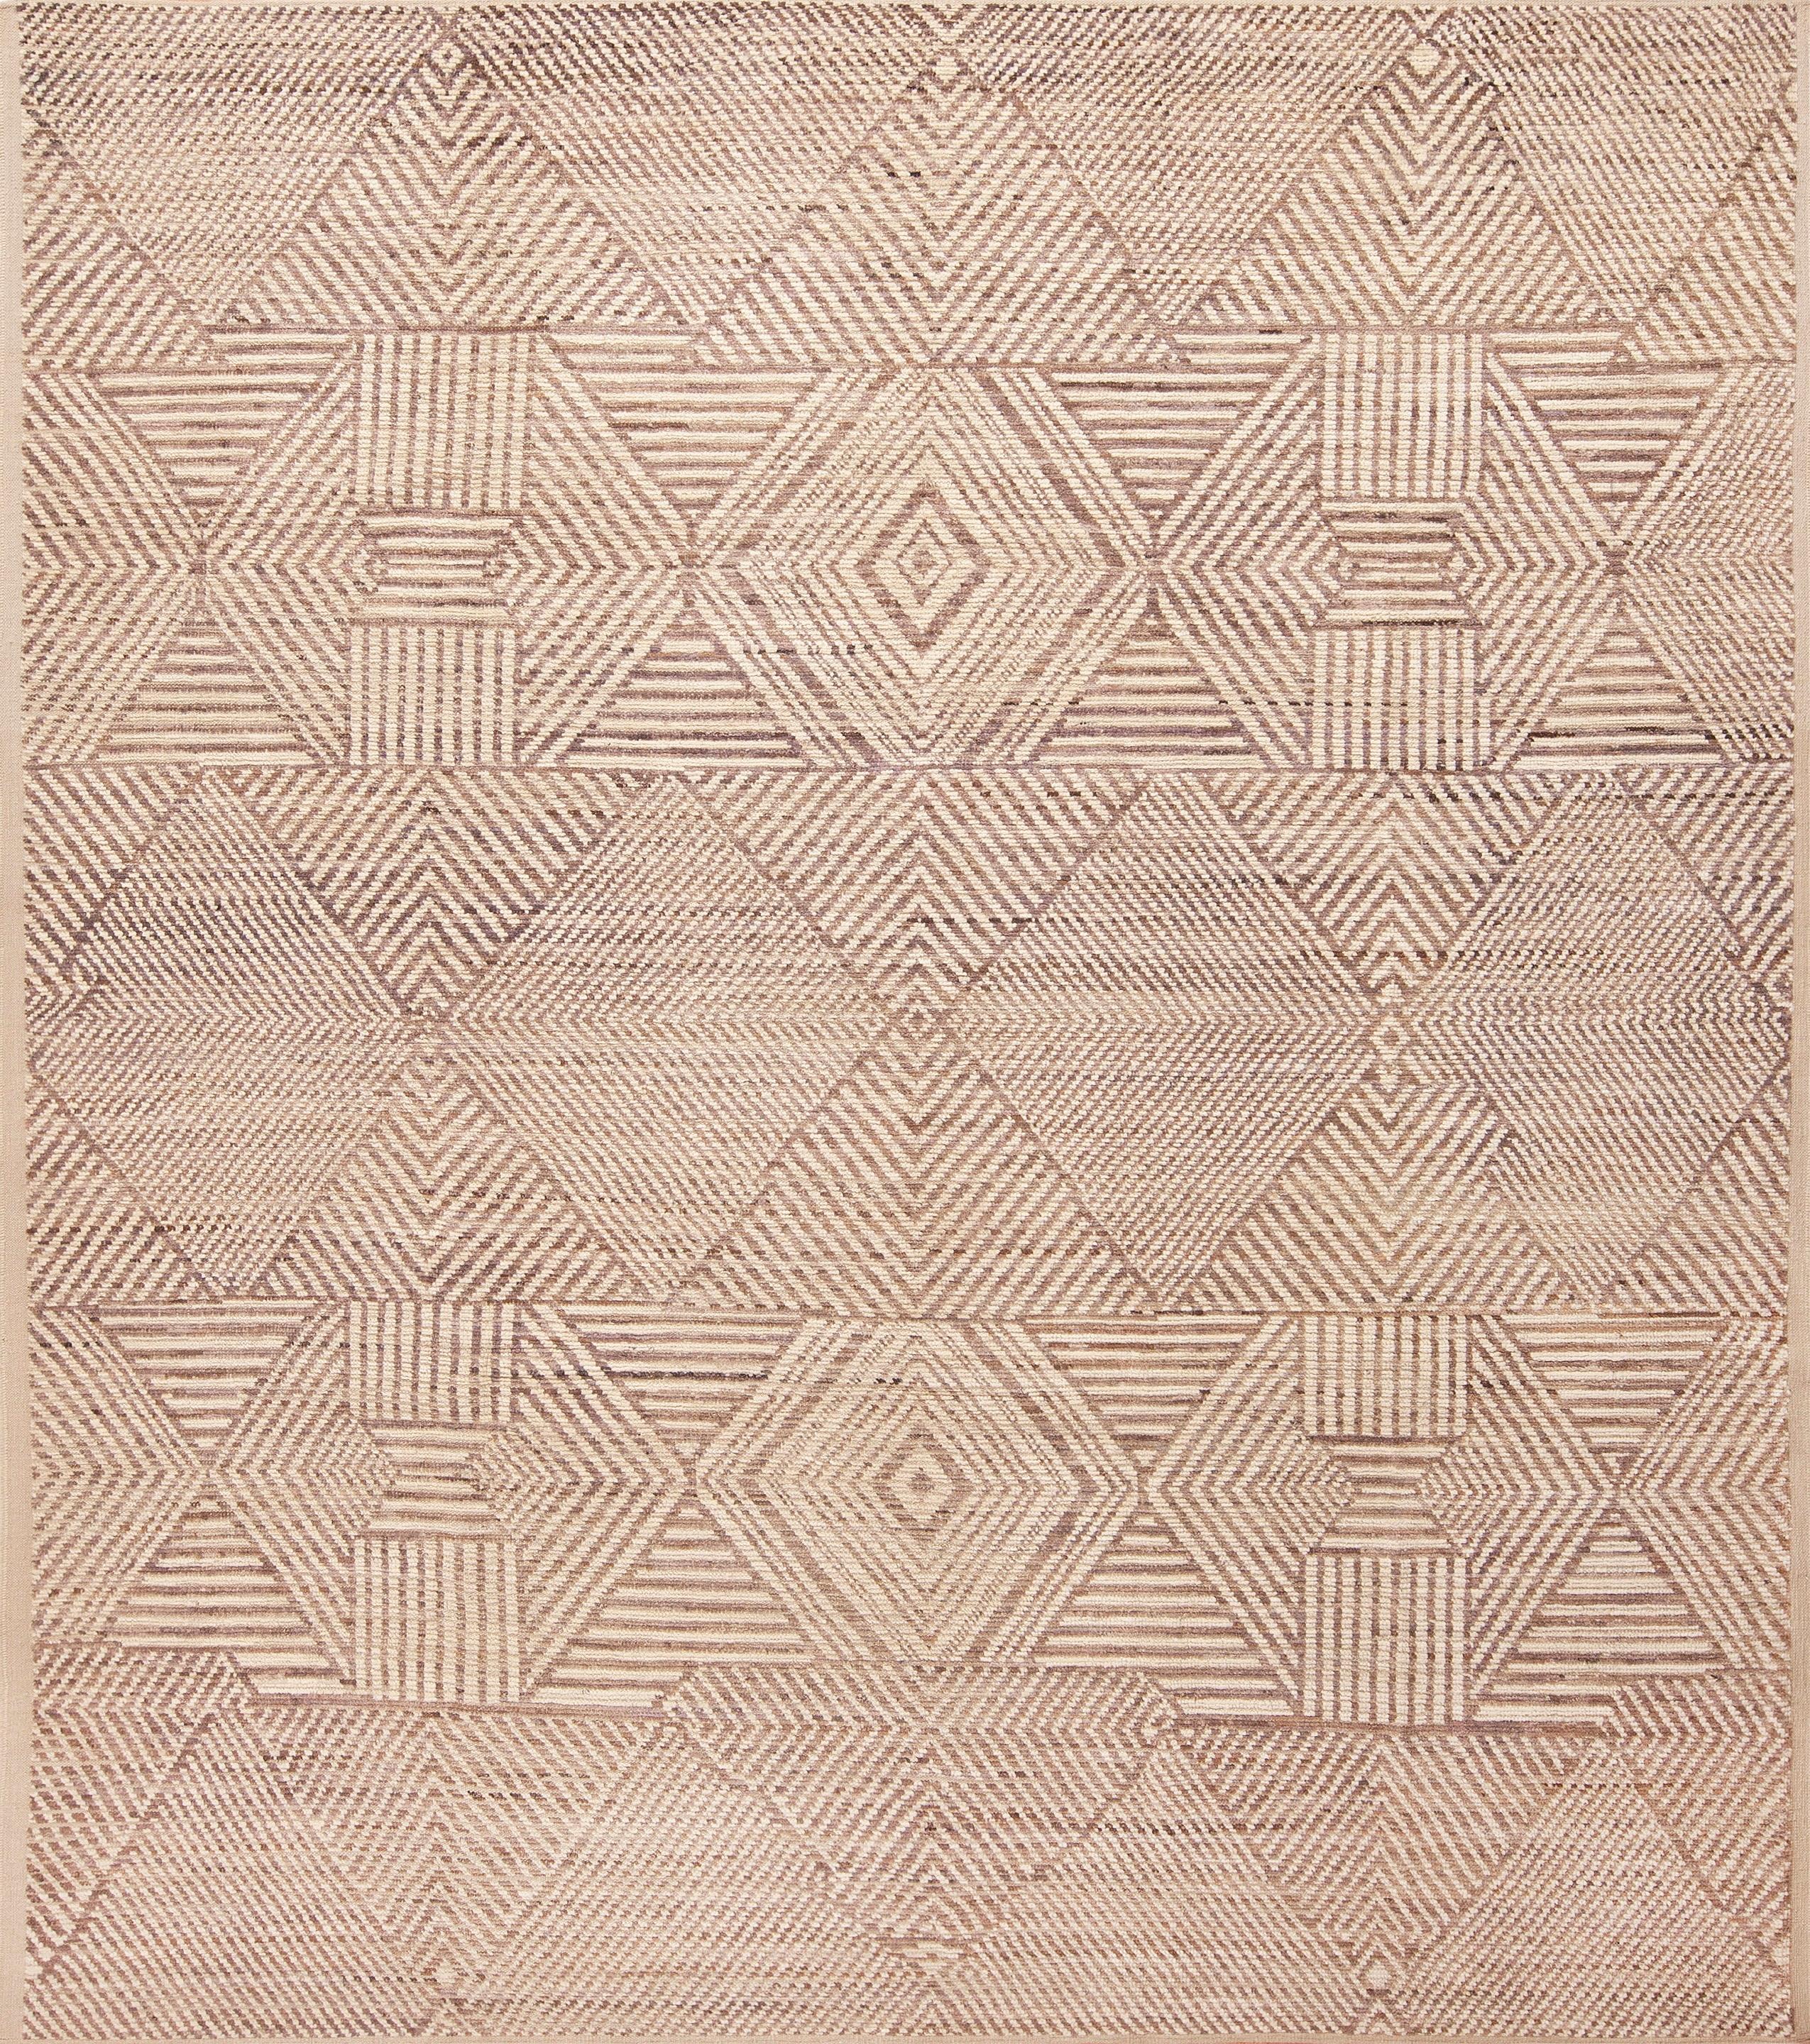 Elegant North African Inspired Tribal Design Modern Geometric Neutral Color Area Rug, Country of origin: Central Asia, Circa date: Modern Rugs

